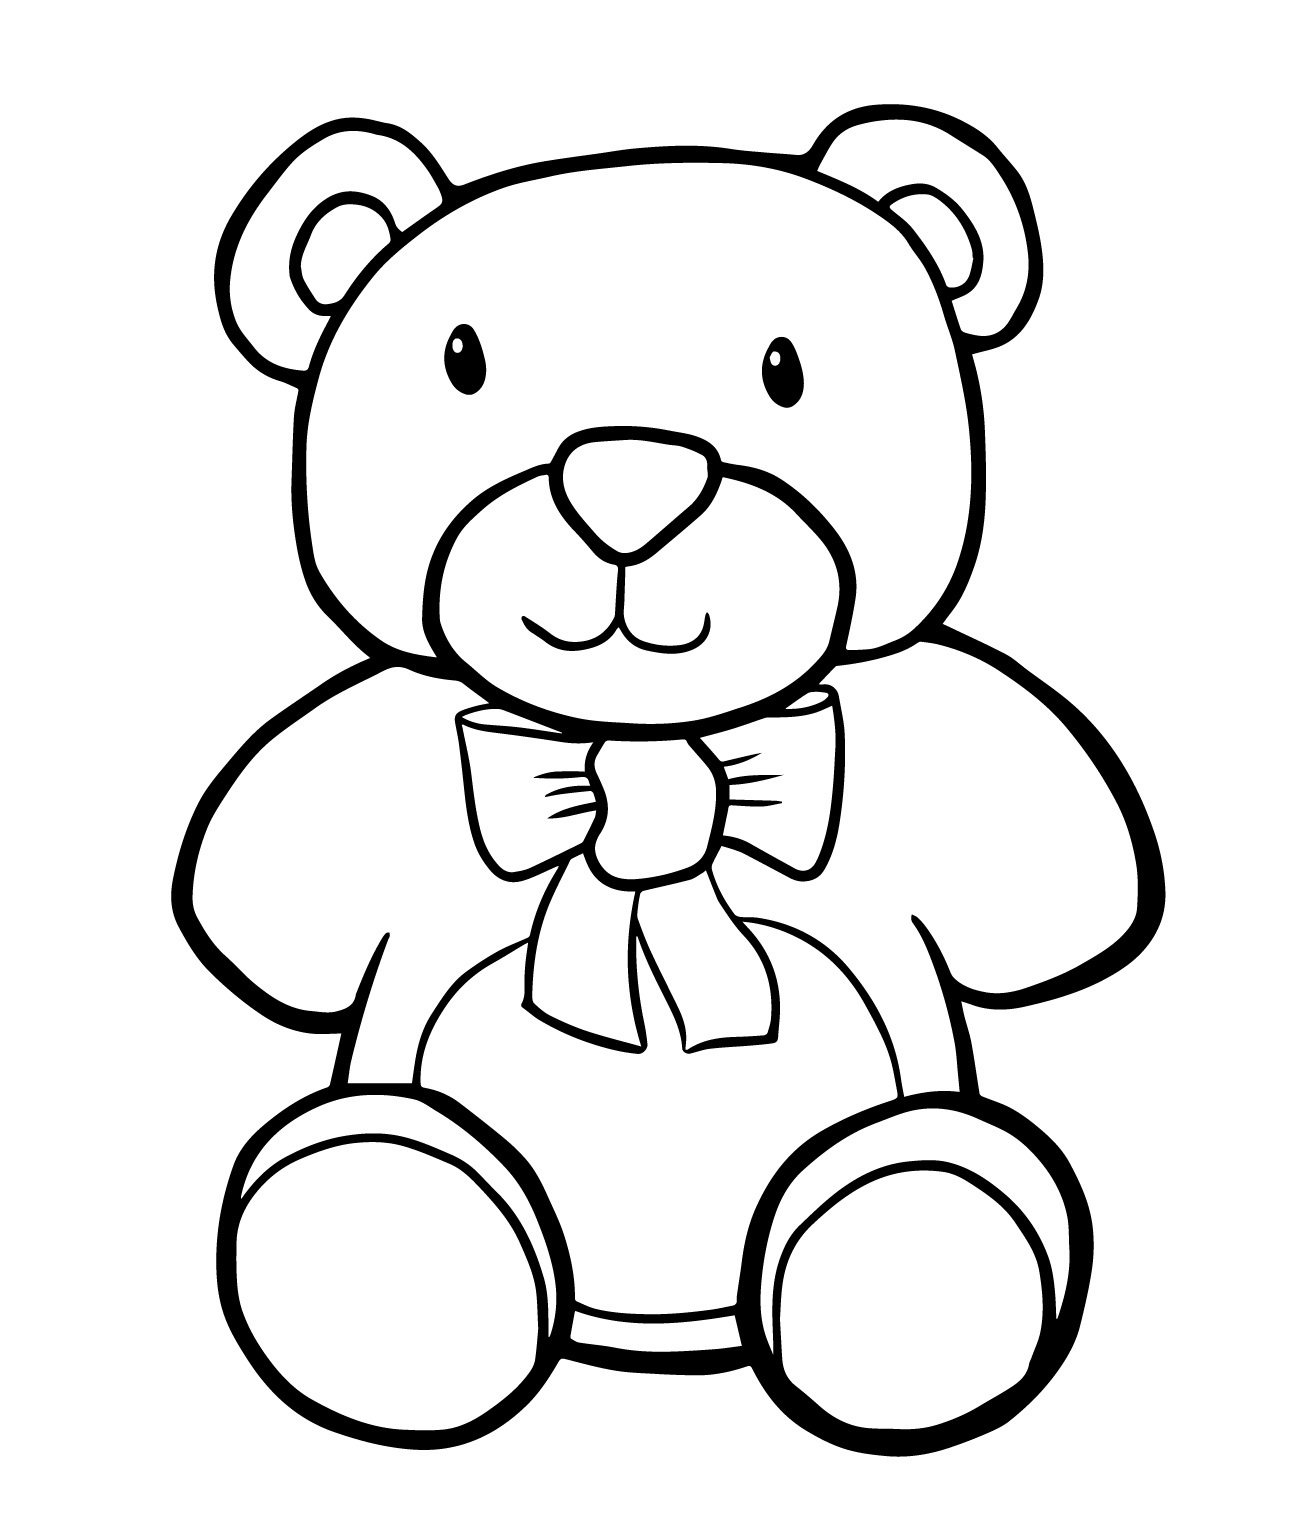 Toys coloring pages